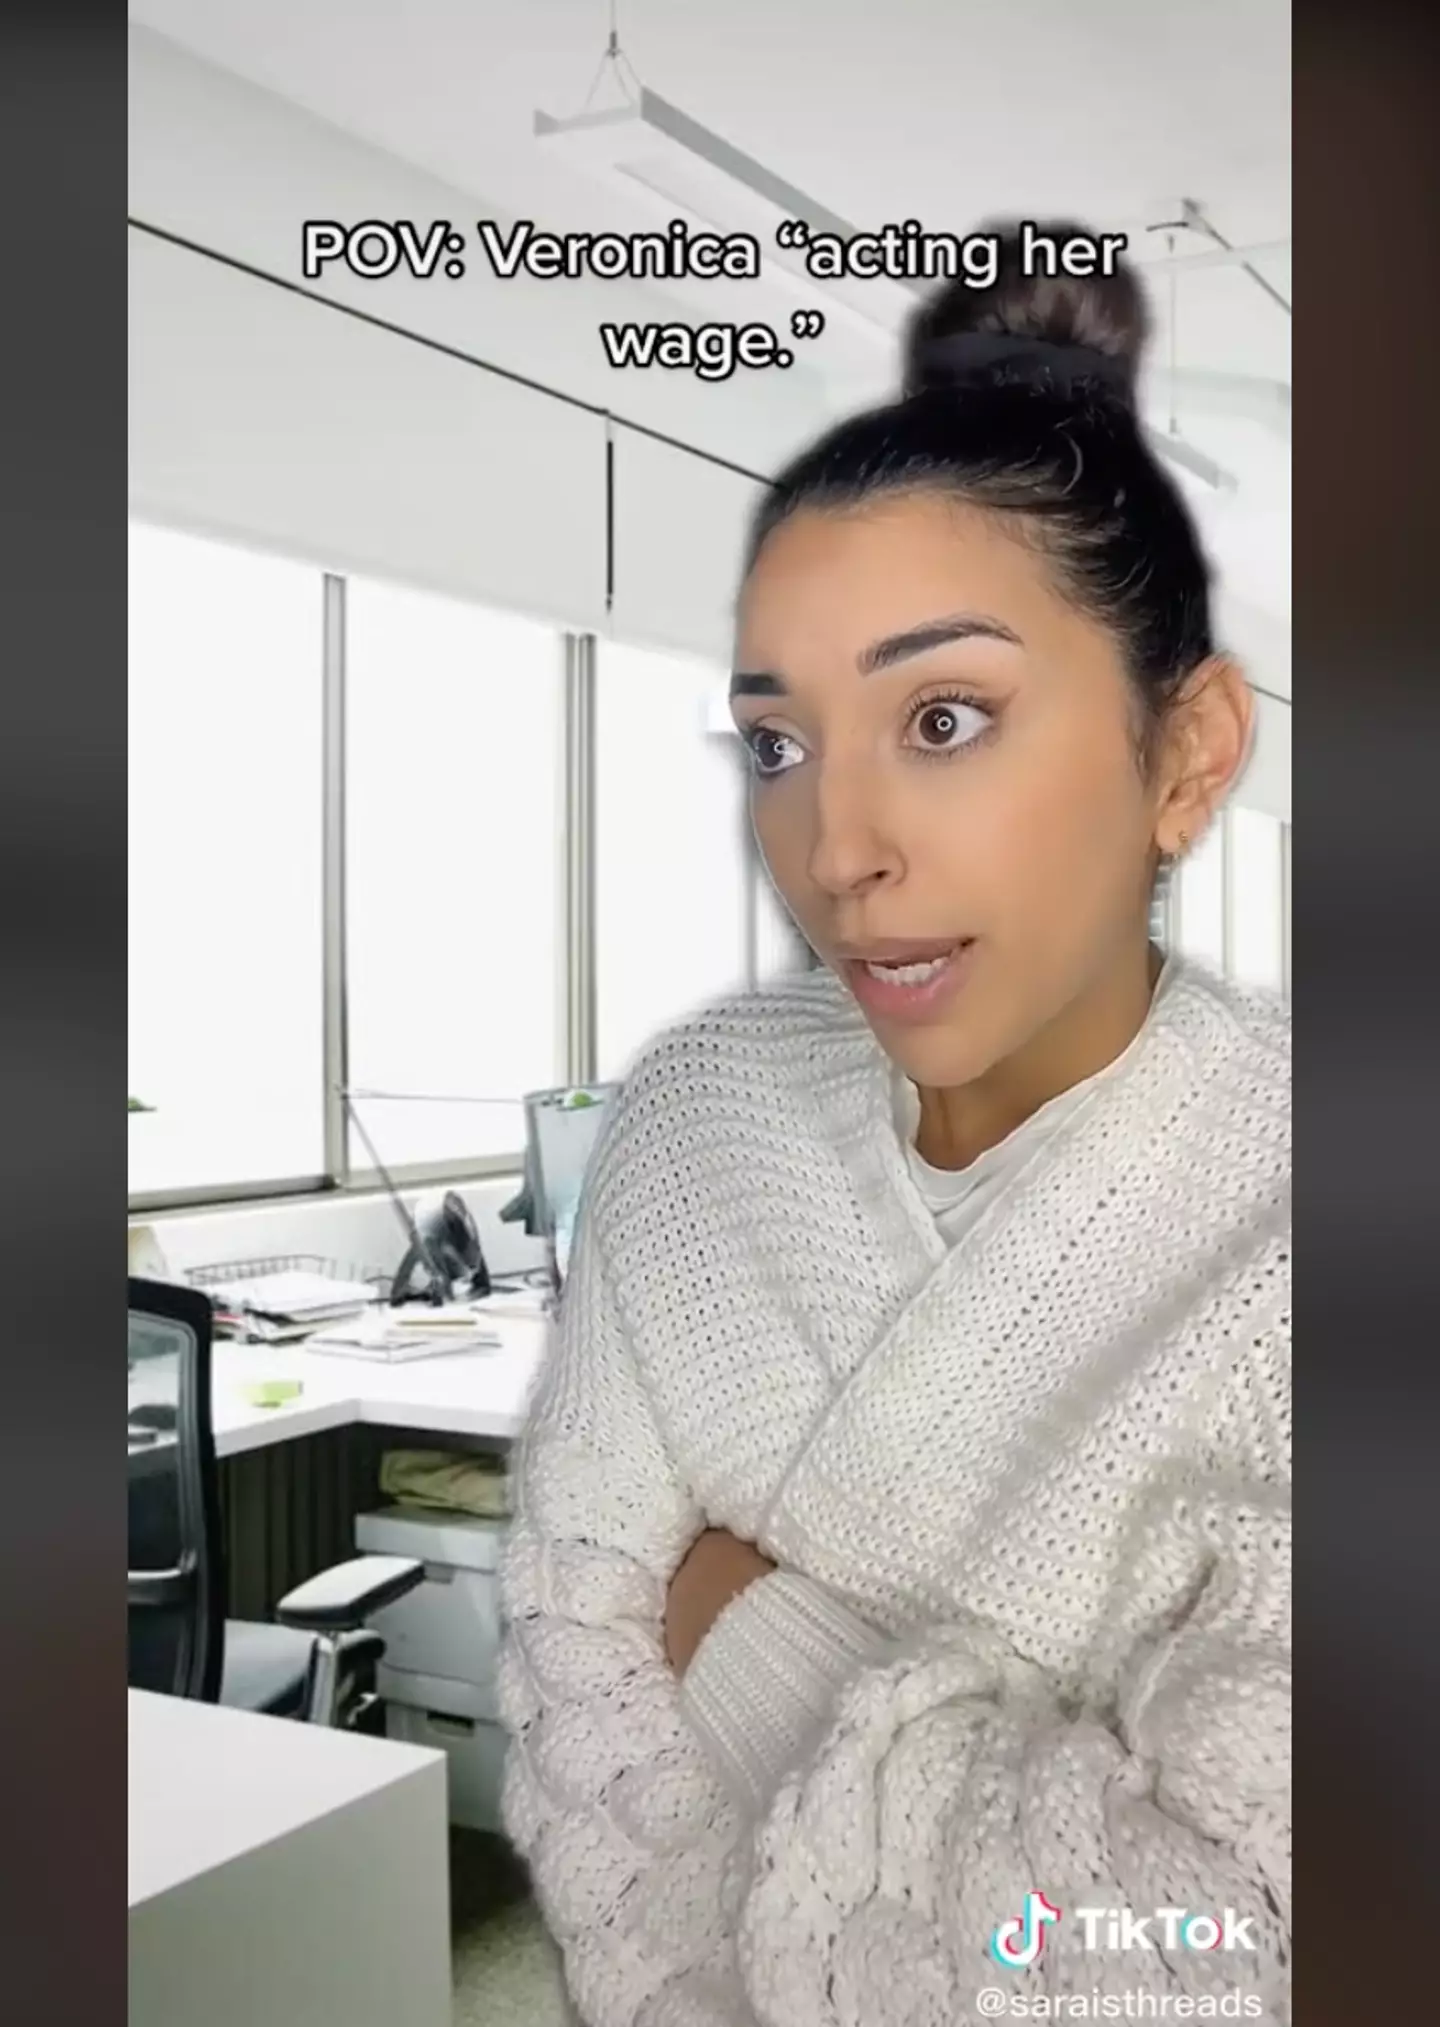 One TikTok user is imploring workers to 'act their wage.